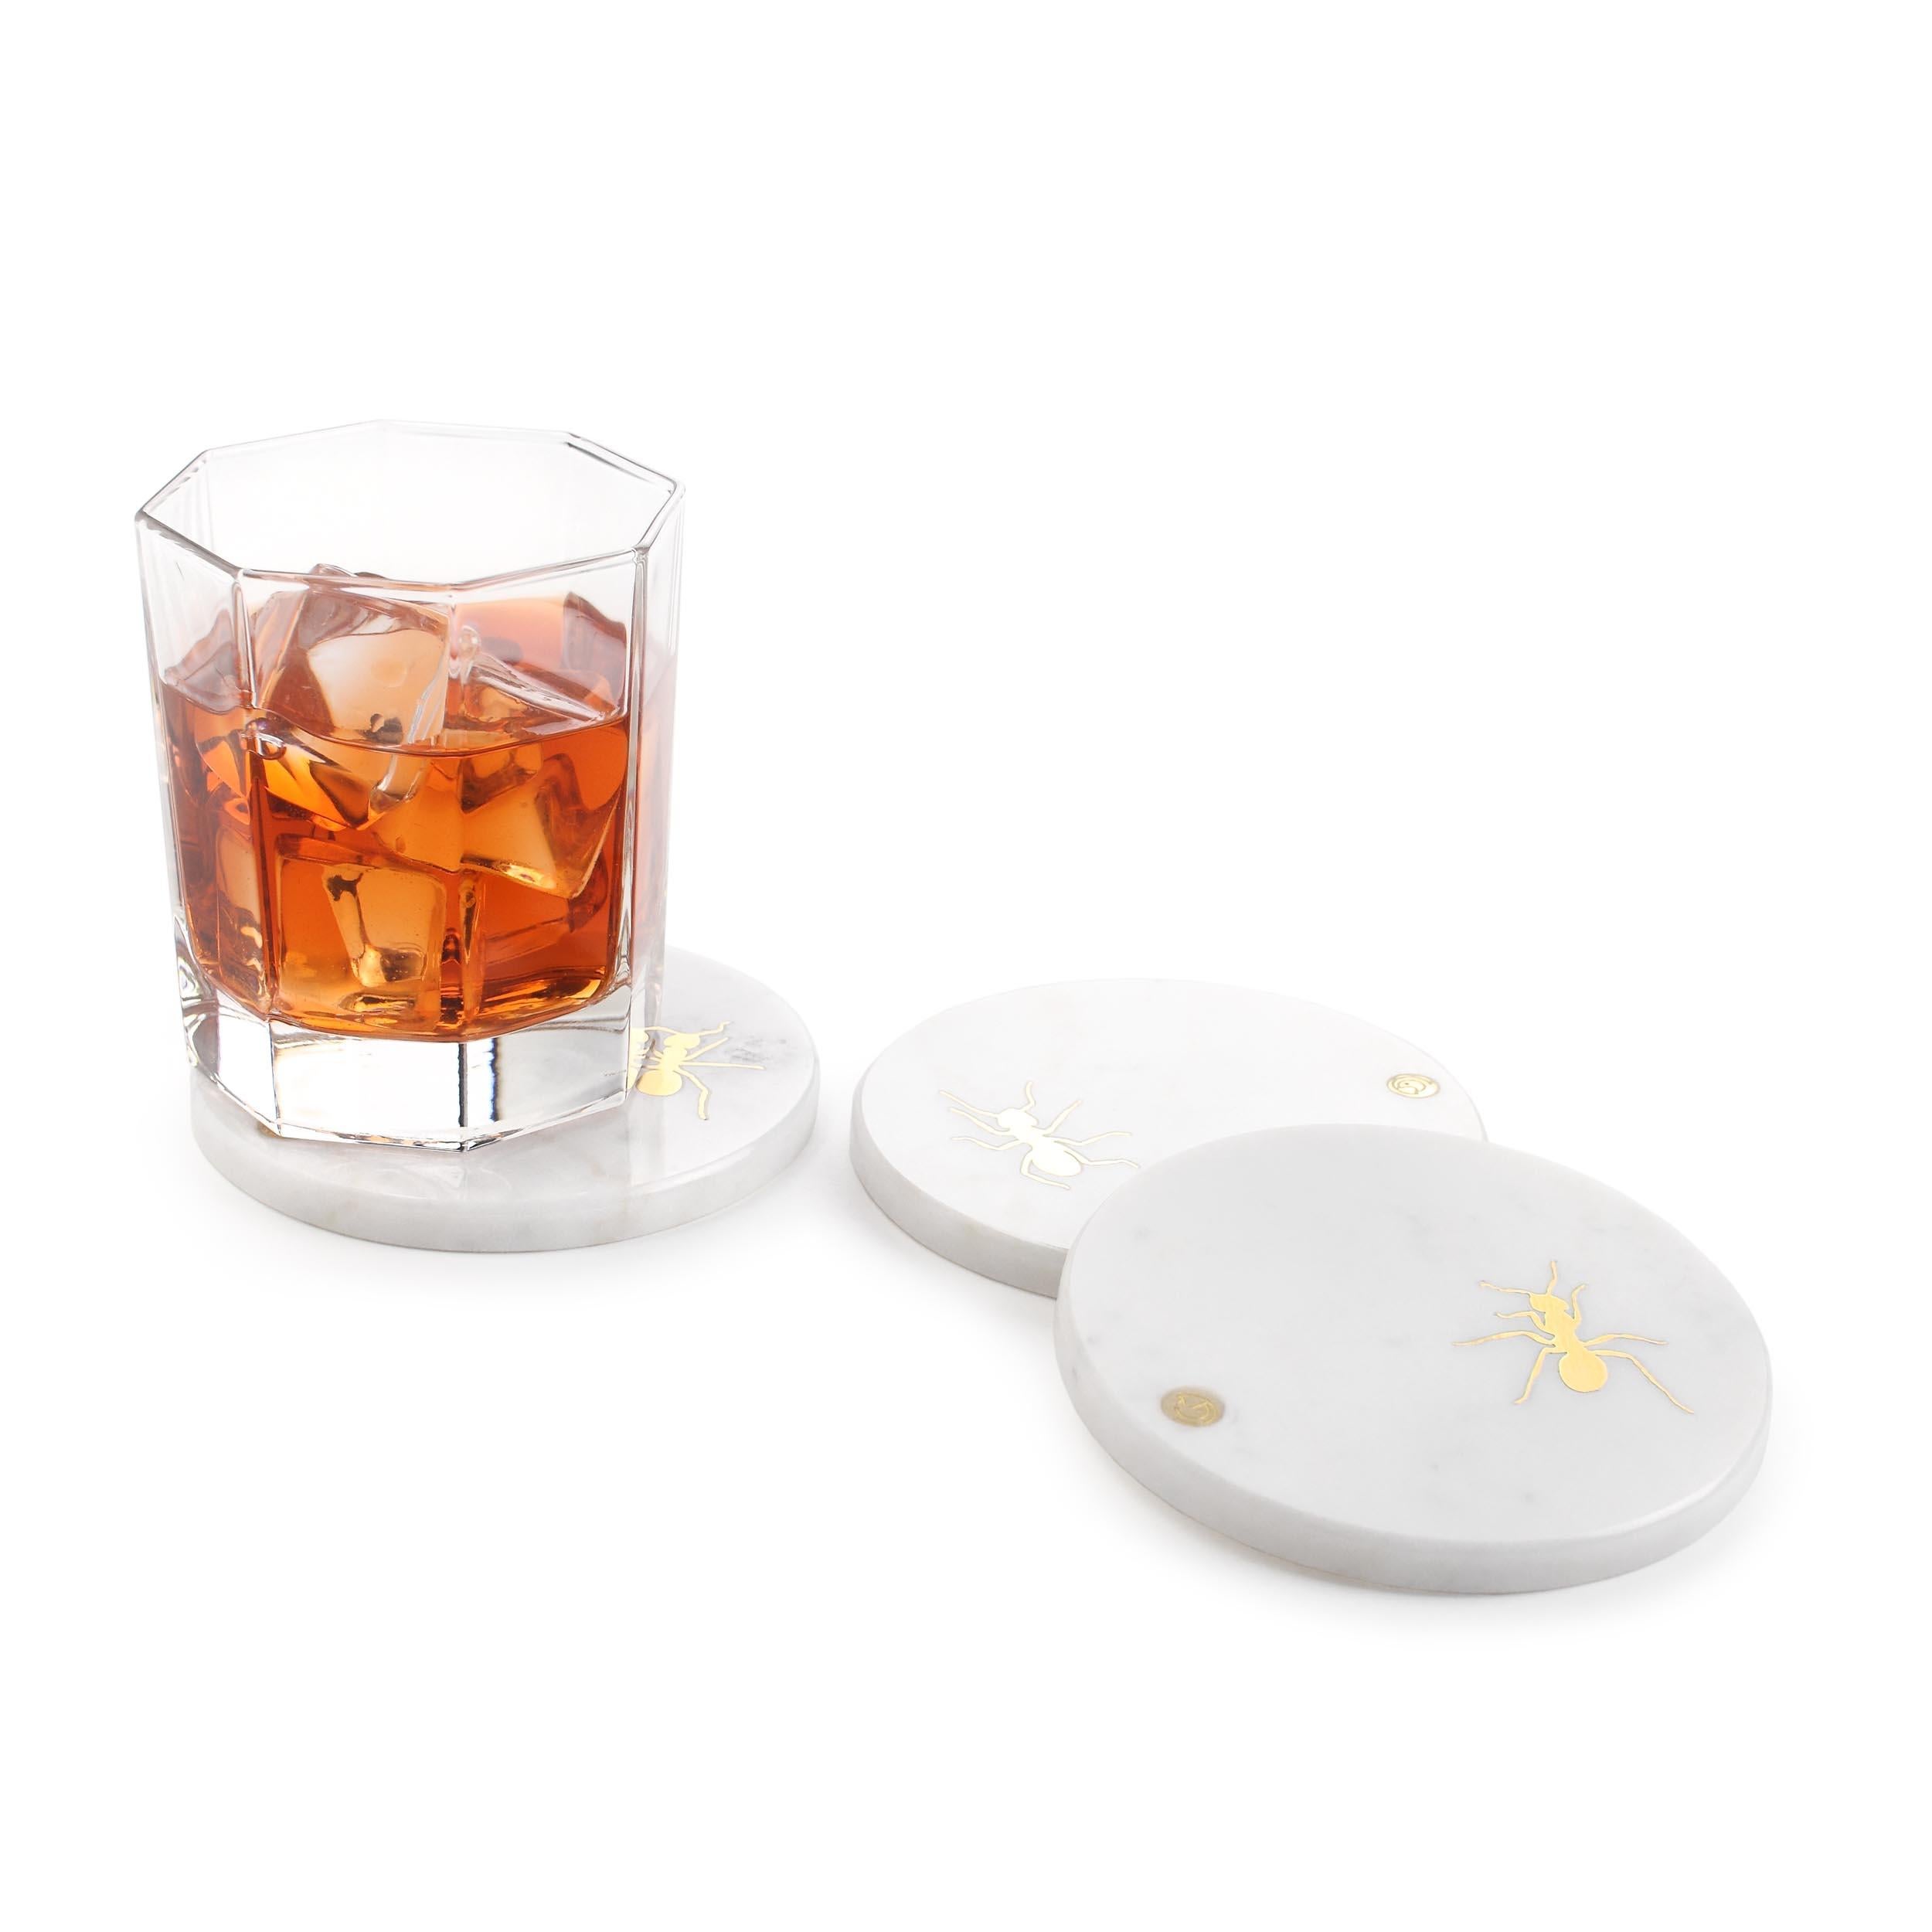 Set of 4 coasters in white Carrara marble with  brushed brass inlay.
Thanks to their shape and size they can be used as exclusive presentation plates for finger food.

Dimensions: D 10 H 0.8 cm. 
Also available: Square: L 10 W 10 H 0.8 cm
Available